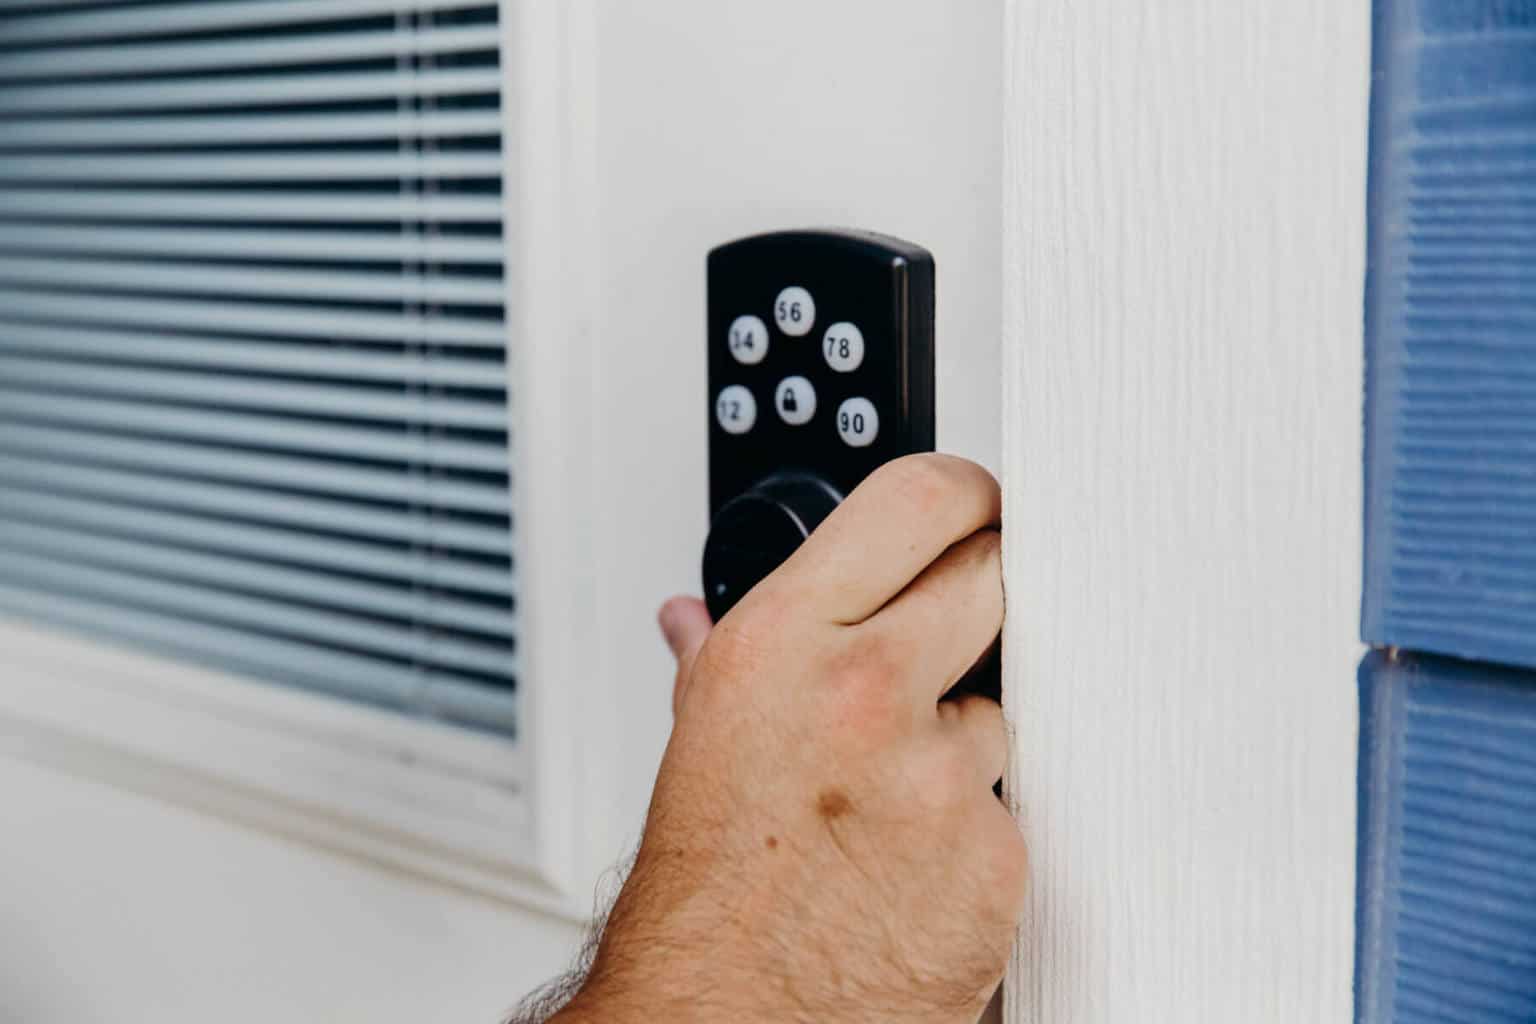 Our Trusted Locksmith Team can unlock your Safes, too!